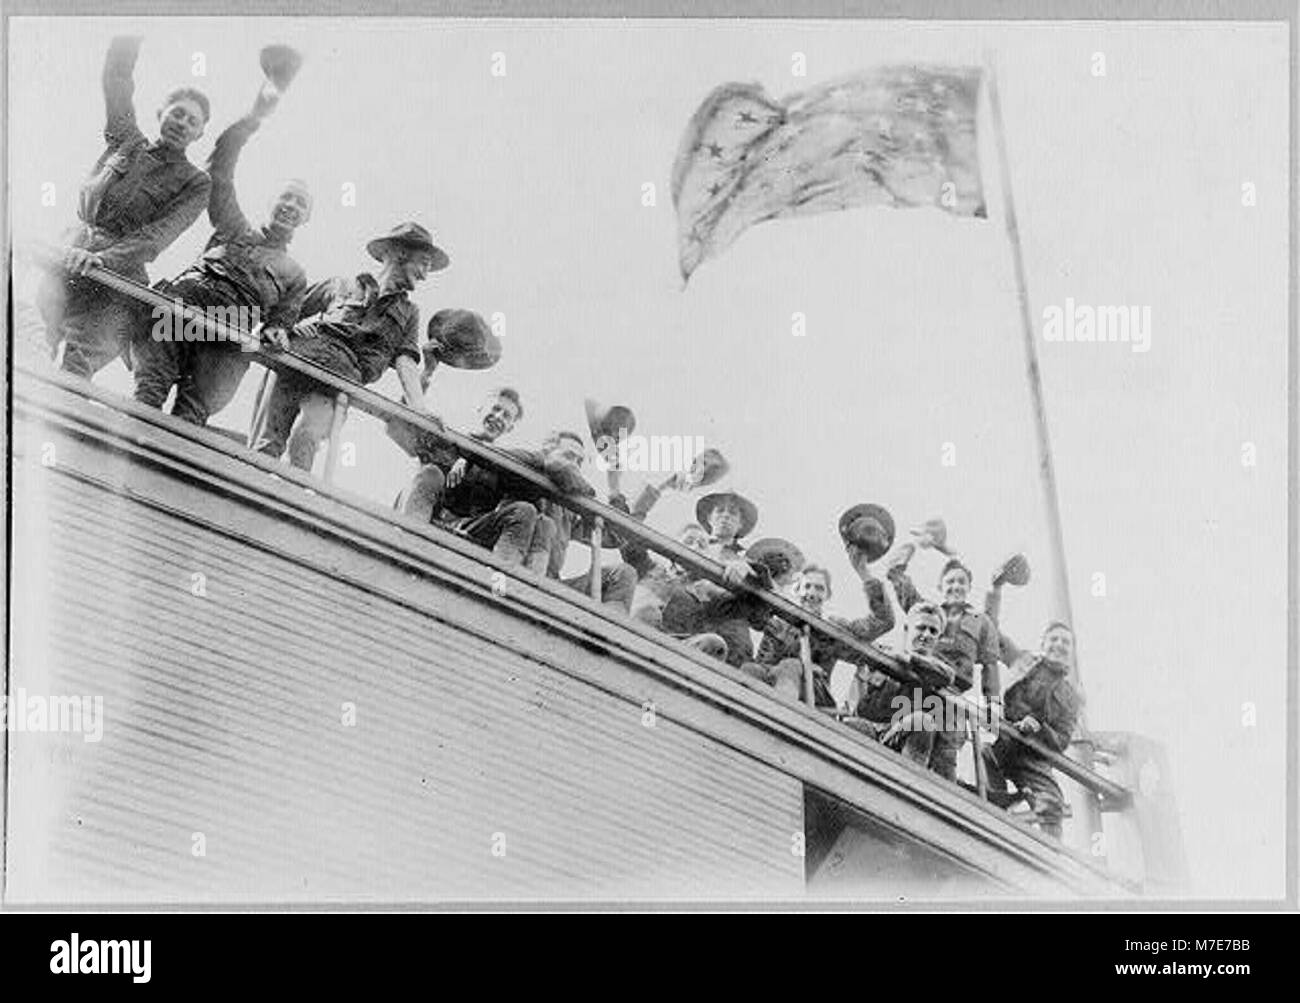 N.Y. National Guard training and maneuvers at Fishkill and Peekskill, N.Y.- Men waving from railing of ferry enroute to Fishkill LCCN2005691558 Stock Photo